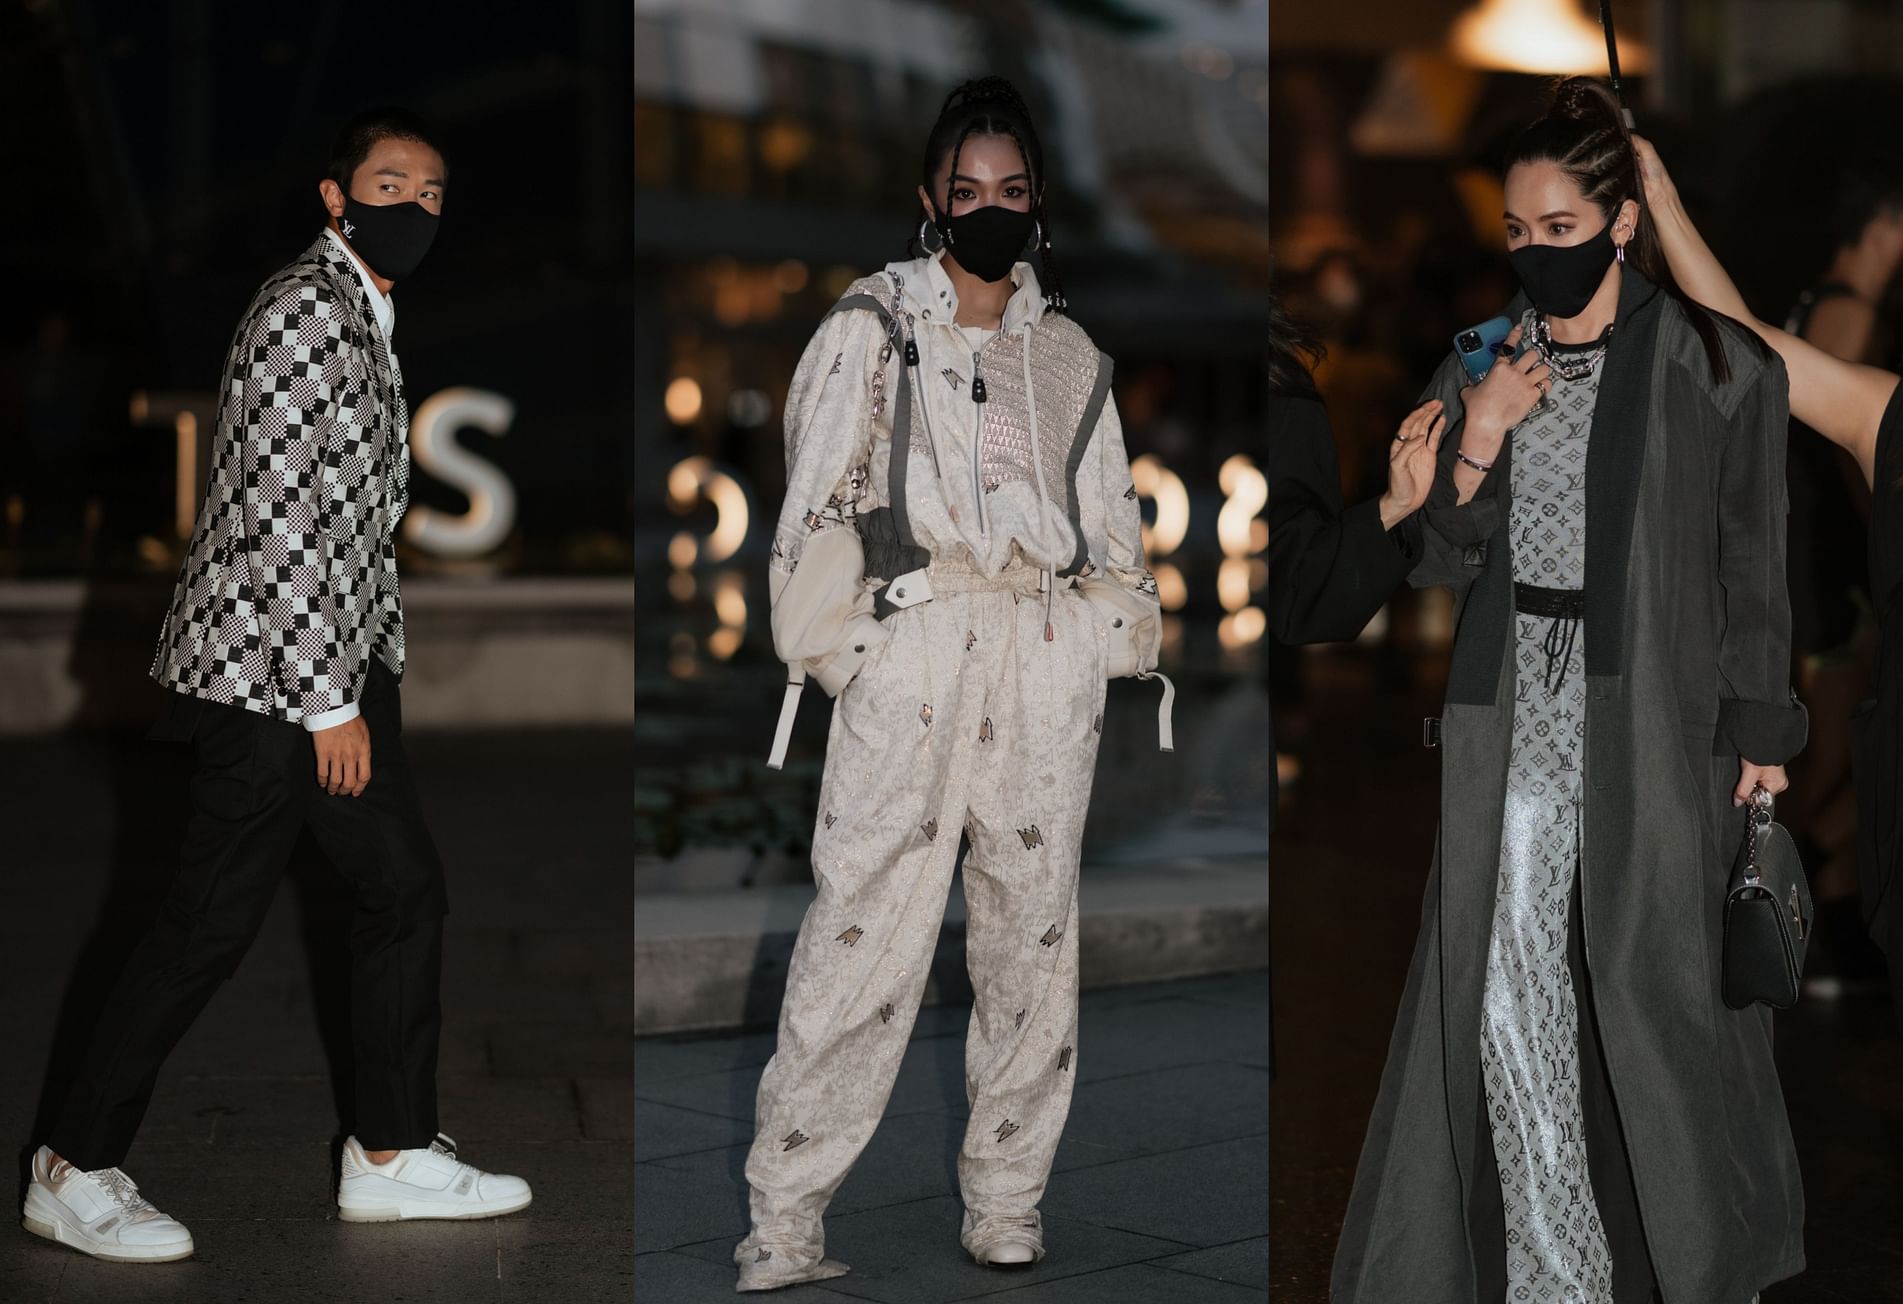 Best street style looks spotted at Louis Vuitton's fashion show in  Singapore - ICON Singapore